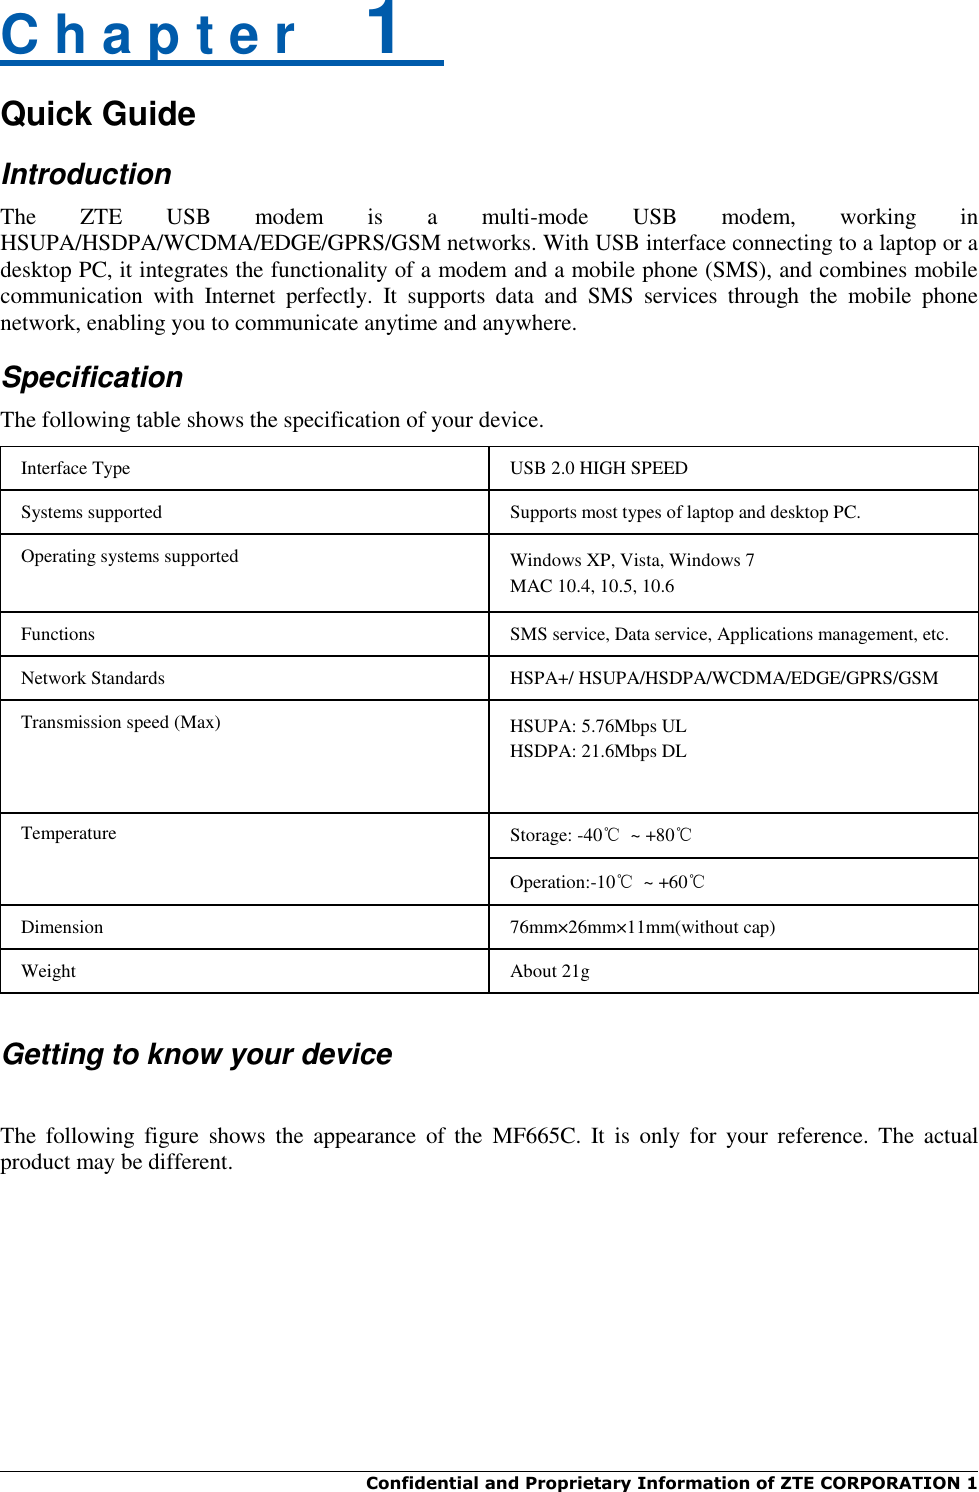  Confidential and Proprietary Information of ZTE CORPORATION 1    C h a p t e r    1   Quick Guide Introduction The  ZTE  USB  modem  is  a  multi-mode  USB  modem,  working  in HSUPA/HSDPA/WCDMA/EDGE/GPRS/GSM networks. With USB interface connecting to a laptop or a desktop PC, it integrates the functionality of a modem and a mobile phone (SMS), and combines mobile communication  with  Internet  perfectly.  It  supports  data  and  SMS  services  through  the  mobile  phone network, enabling you to communicate anytime and anywhere. Specification The following table shows the specification of your device. Interface Type USB 2.0 HIGH SPEED Systems supported Supports most types of laptop and desktop PC. Operating systems supported Windows XP, Vista, Windows 7 MAC 10.4, 10.5, 10.6 Functions SMS service, Data service, Applications management, etc. Network Standards HSPA+/ HSUPA/HSDPA/WCDMA/EDGE/GPRS/GSM Transmission speed (Max) HSUPA: 5.76Mbps UL HSDPA: 21.6Mbps DL Temperature Storage: -40℃  ~ +80℃ Operation:-10℃  ~ +60℃ Dimension 76mm×26mm×11mm(without cap) Weight About 21g   Getting to know your device  The  following  figure  shows  the  appearance  of  the  MF665C.  It  is  only  for  your  reference.  The  actual product may be different. 